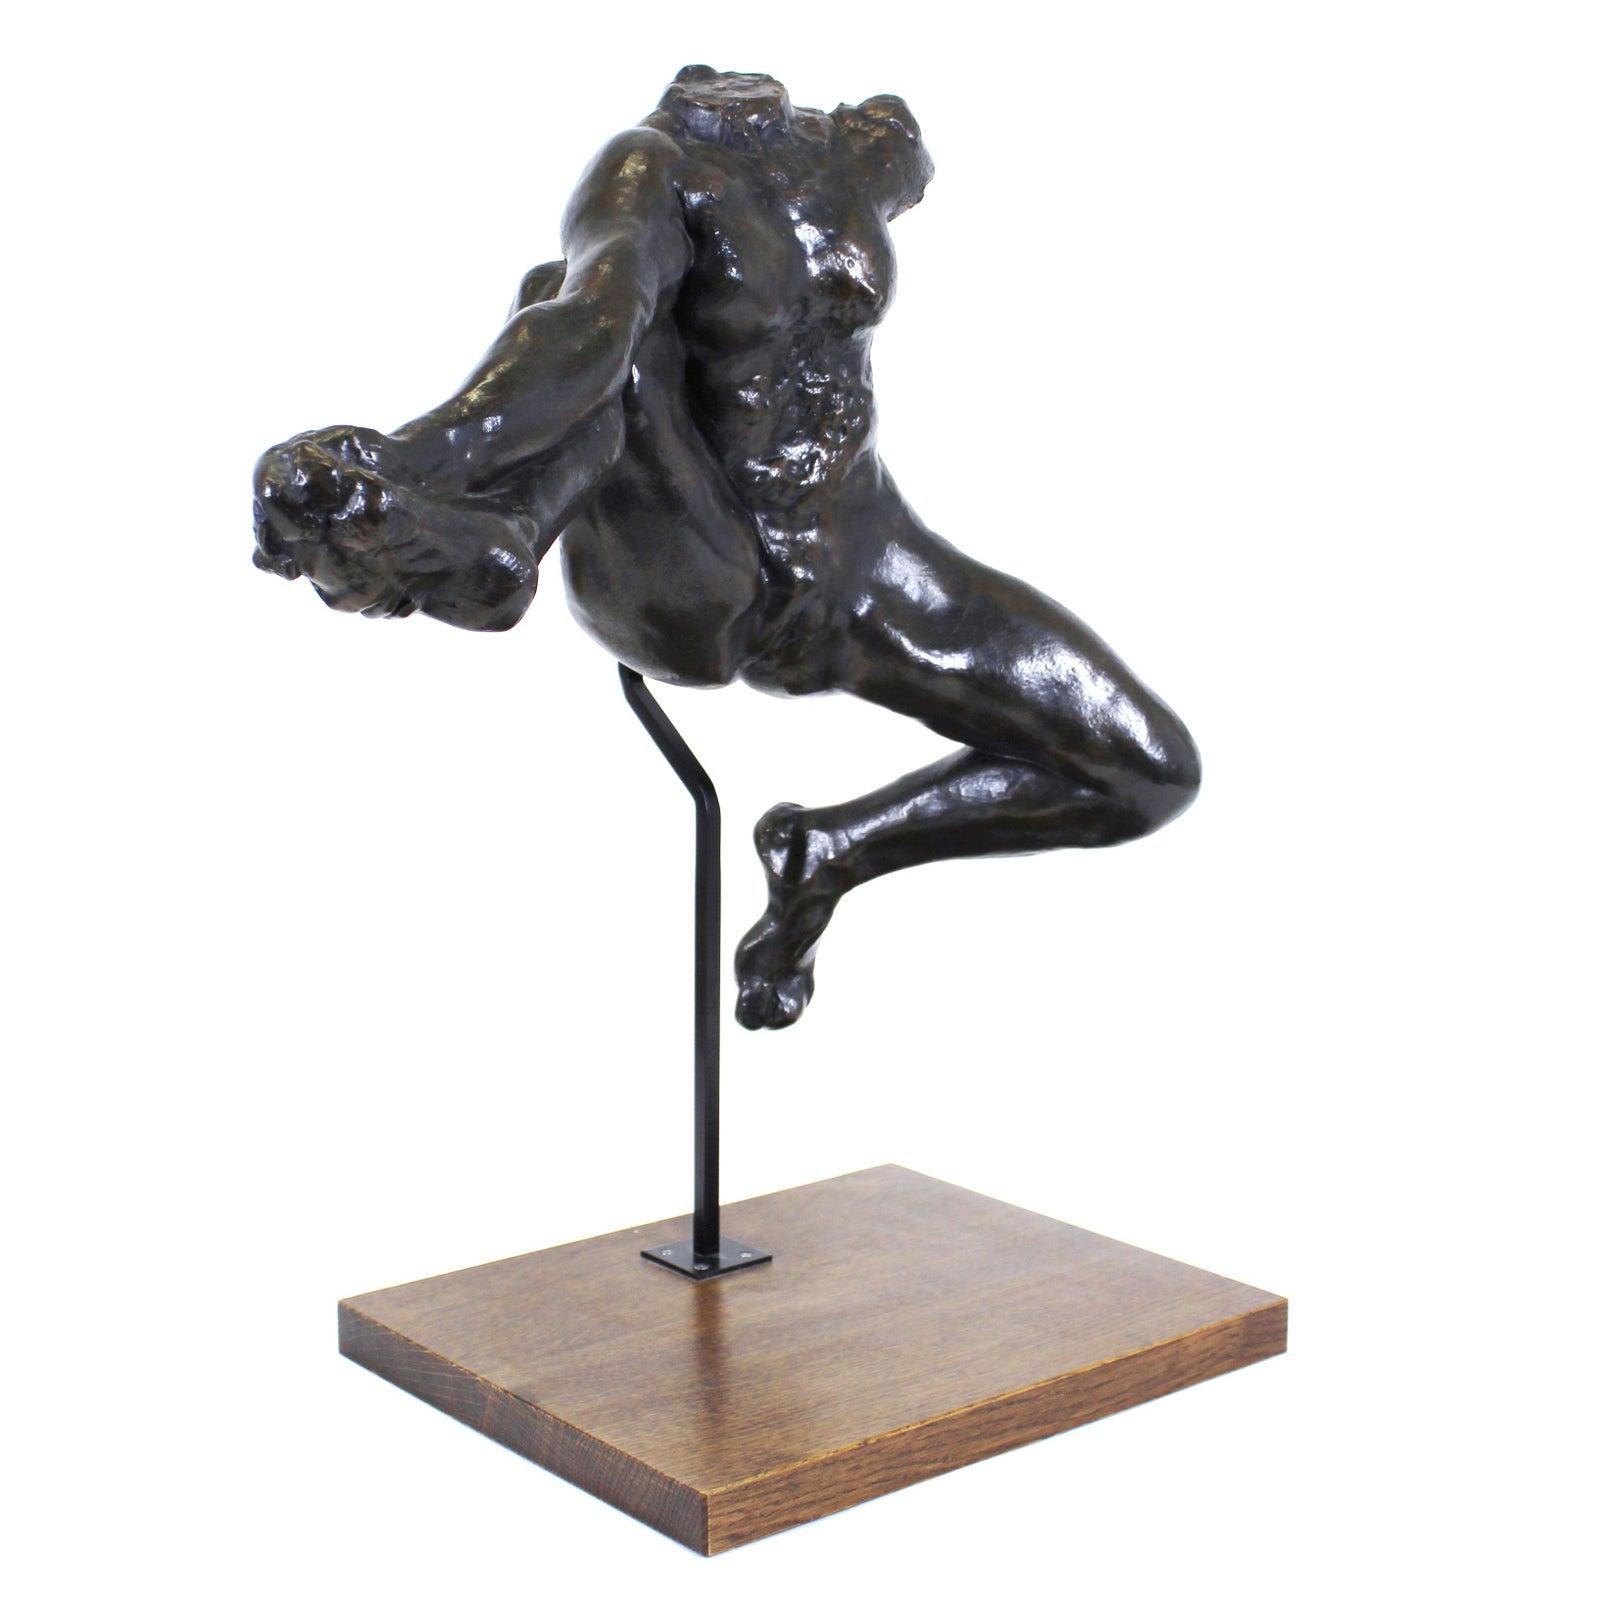 After Auguste Rodin ( French, 1840-1917) 'Iris, Messenger of the Gods' museum reproduction in resin with bronze patina, Mark of the Musee Rodin, Paris
Dimensions : 18